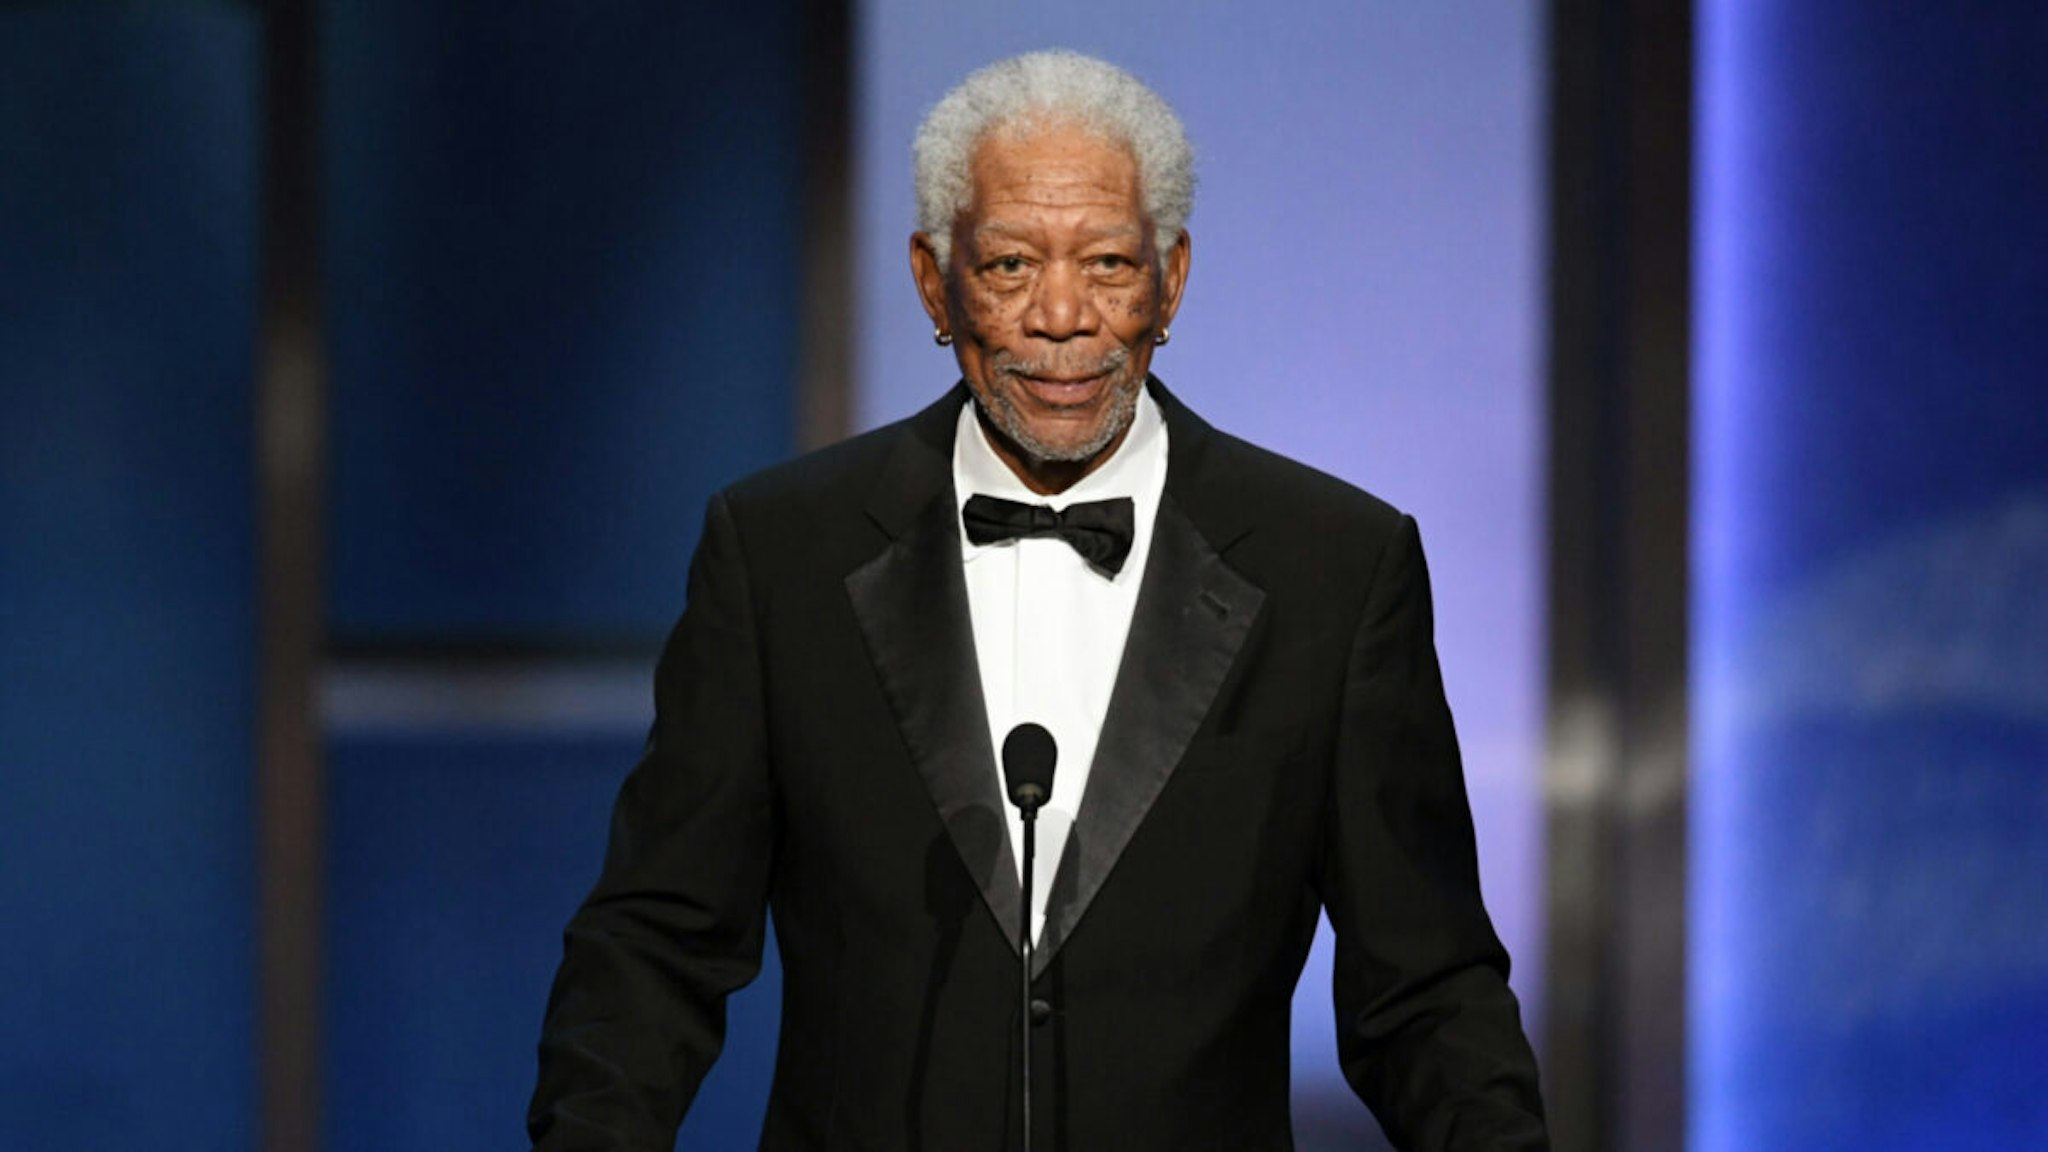 Morgan Freeman speaks onstage during the 47th AFI Life Achievement Award honoring Denzel Washington at Dolby Theatre on June 06, 2019 in Hollywood, California.